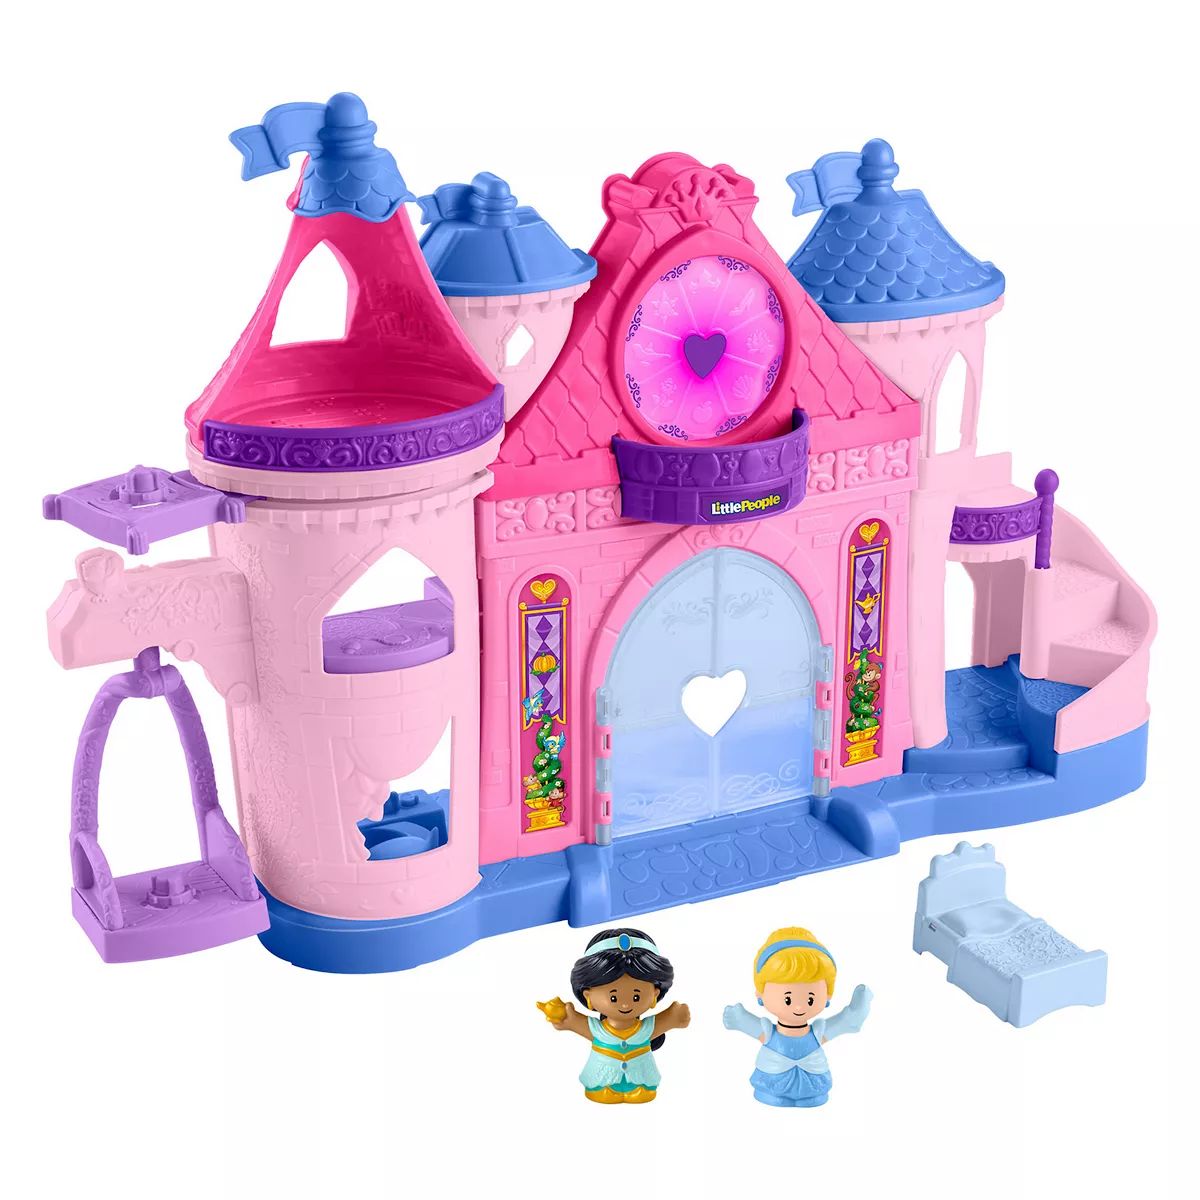 Disney Princess Magical Lights & Dancing Castle Play 4-piece Set by Fisher-Price Little People | Kohl's